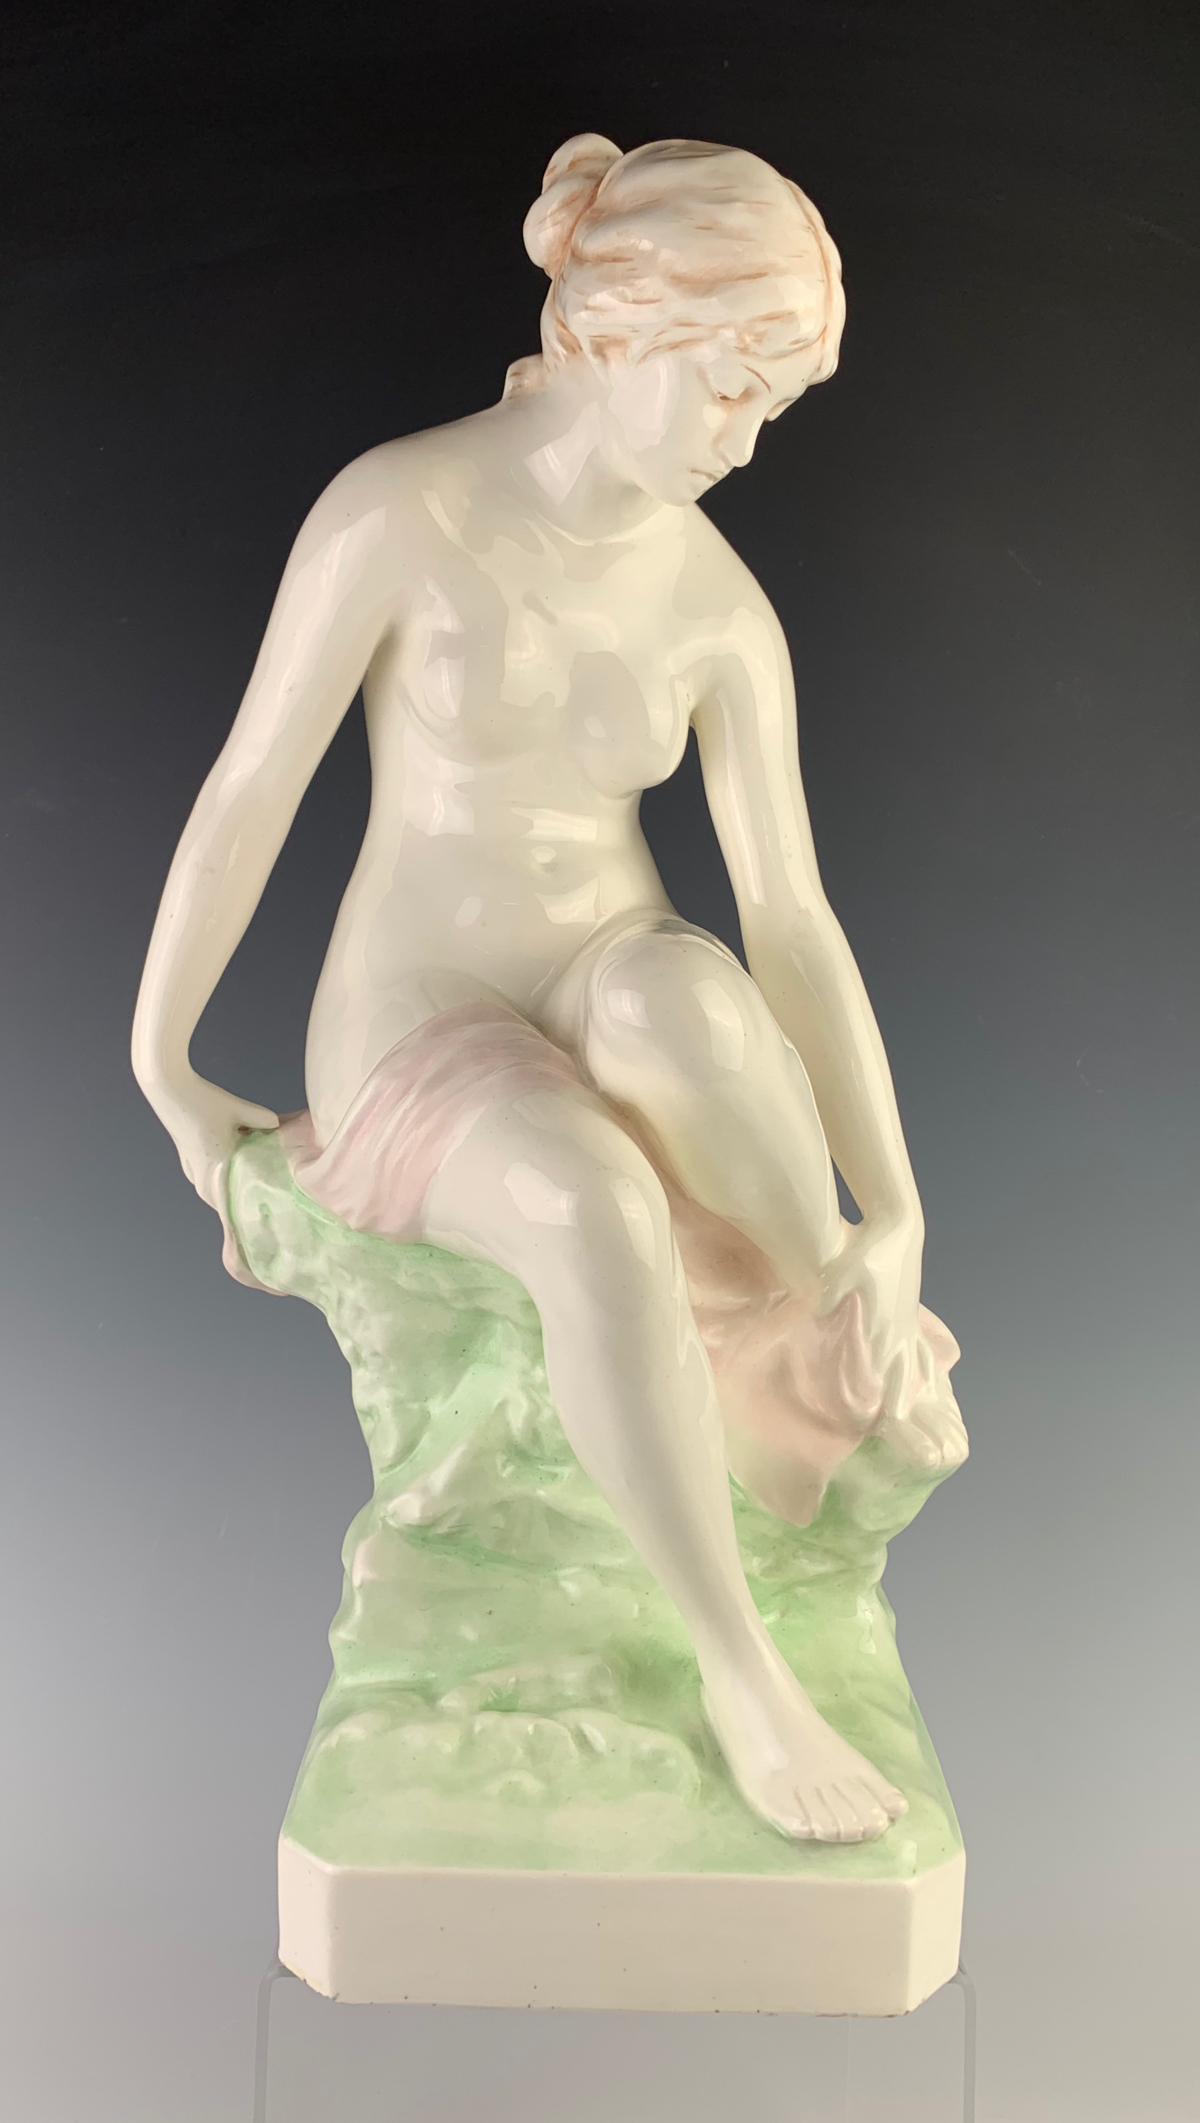 Nude Figurine by Royal Dux - Image 4 of 5